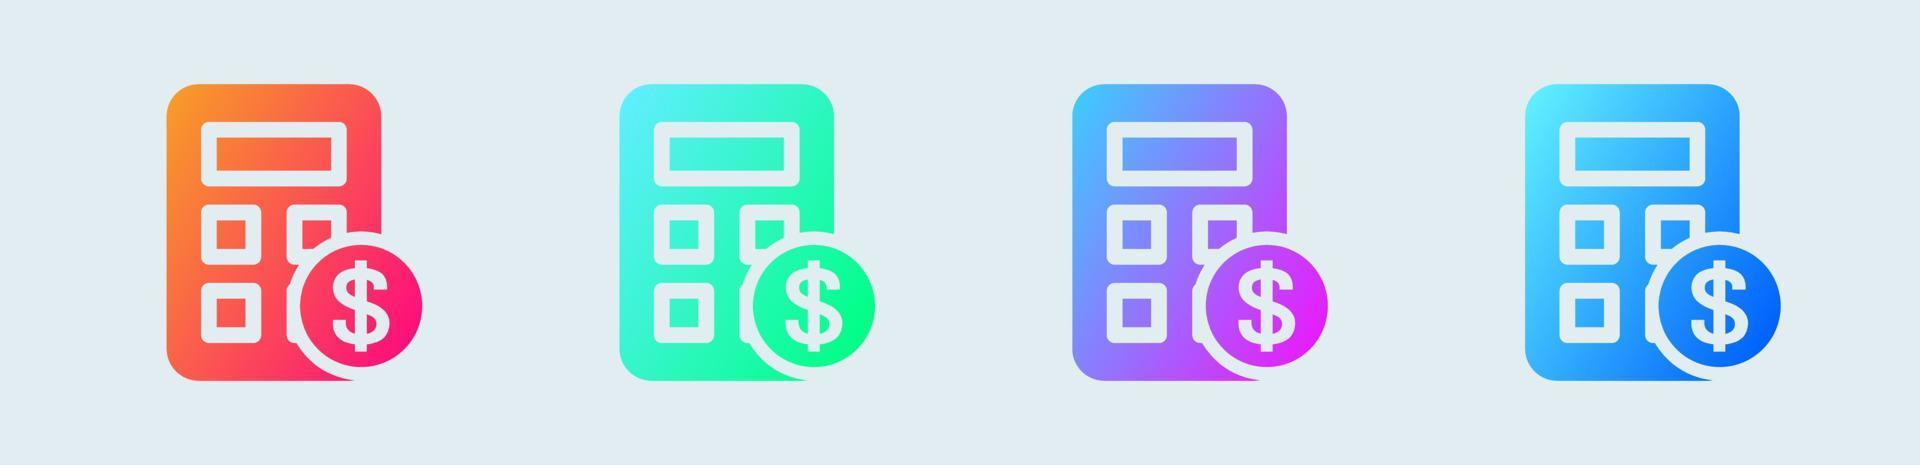 Calculator solid icon in gradient colors. Finance signs vector illustration.